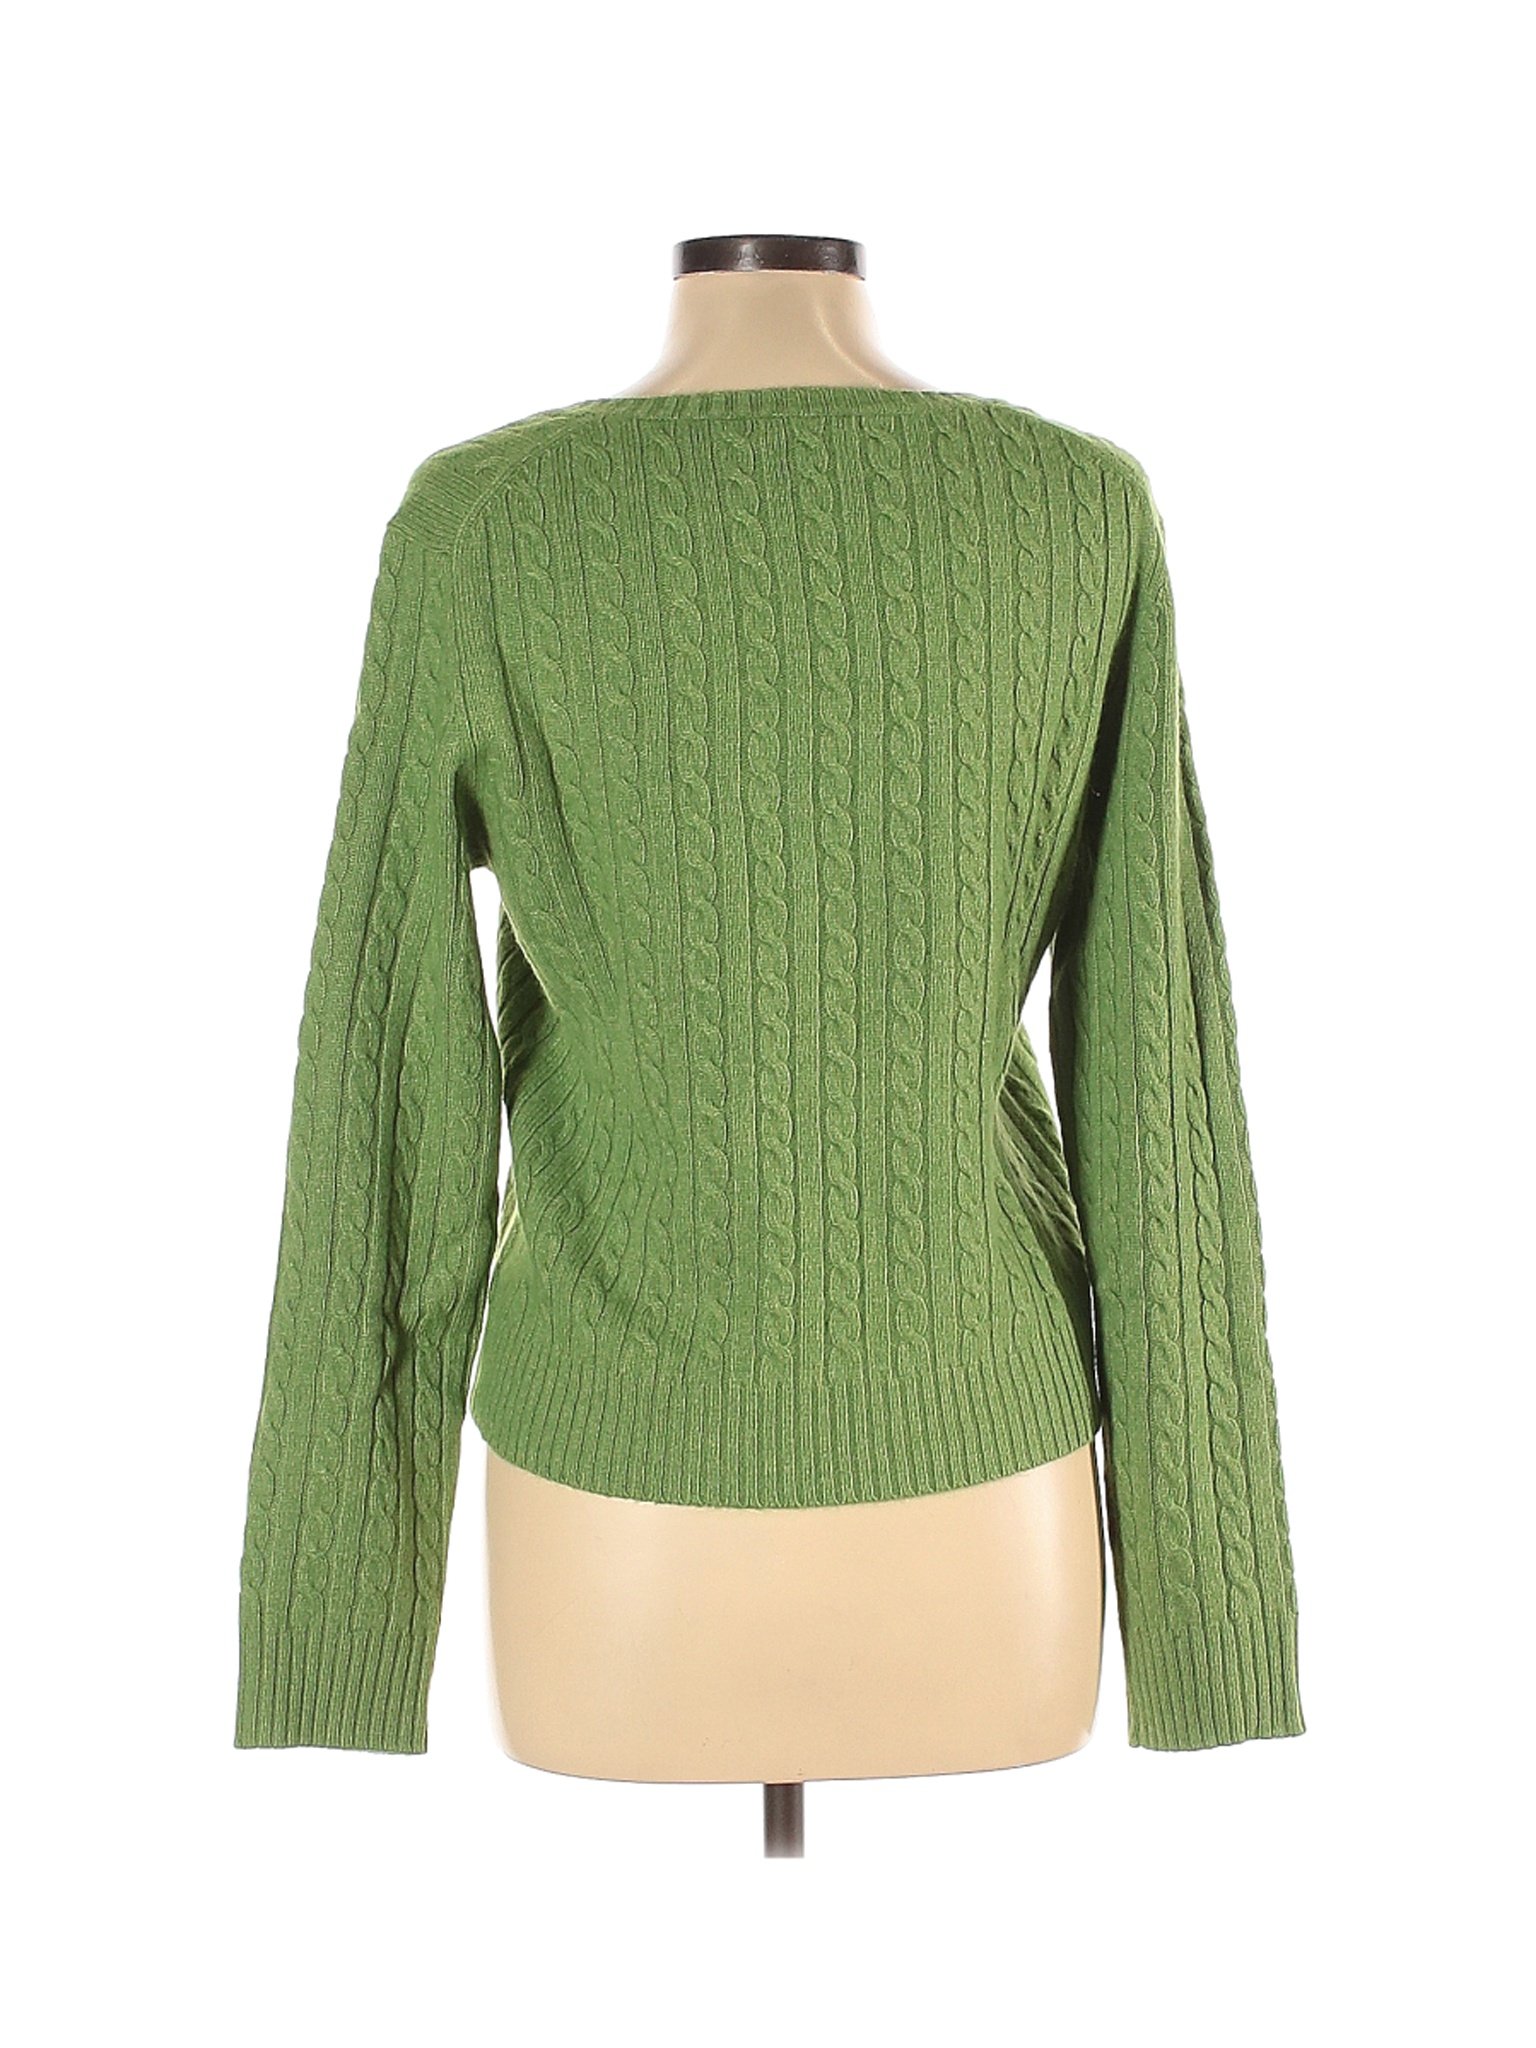 The Limited Women Green Pullover Sweater L | eBay